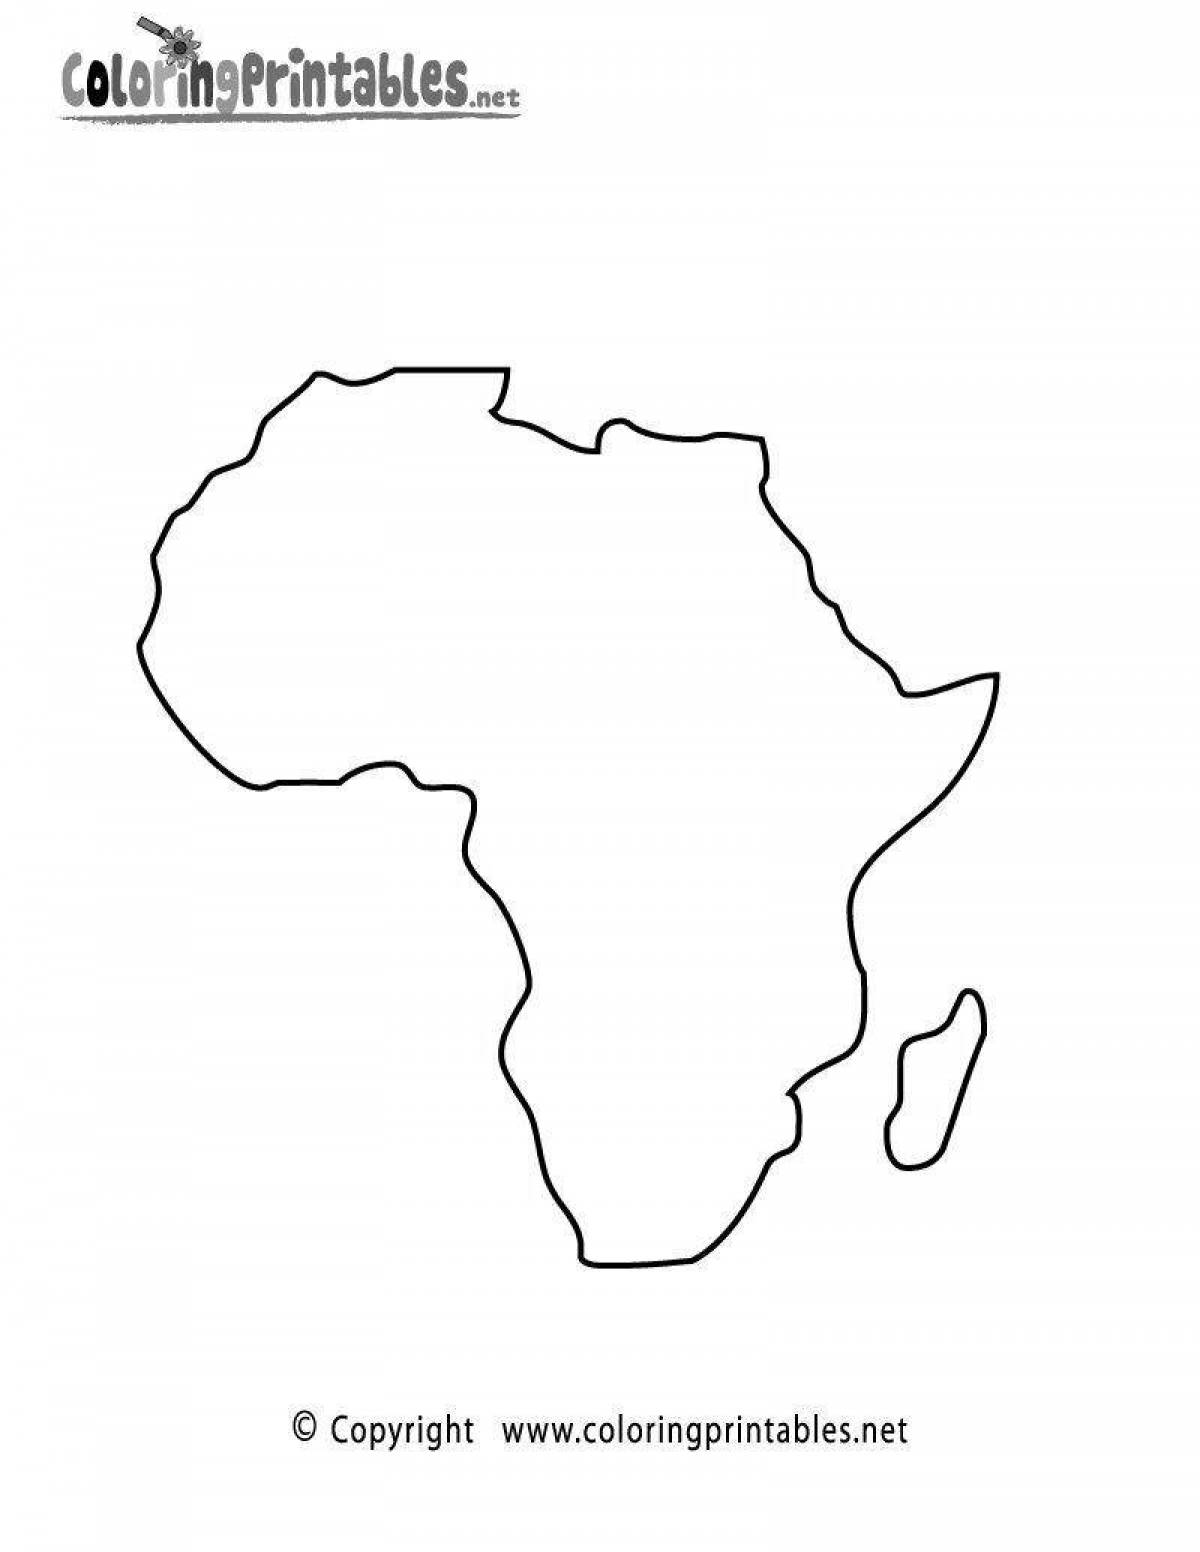 Coloring book dazzling africa map